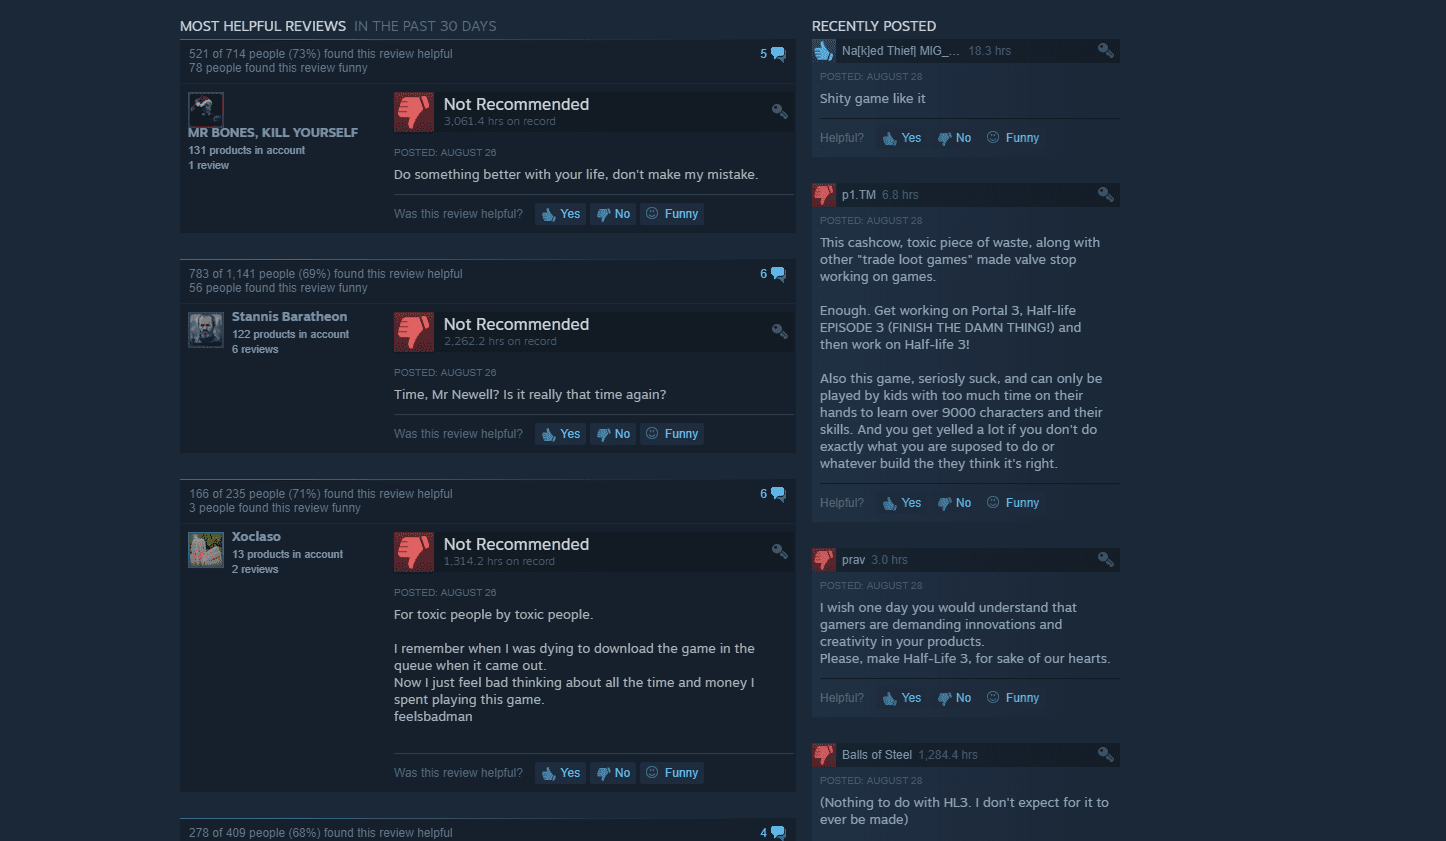 DOTA 2 is Getting Negative Reviews on Steam Because of Half-Life 3